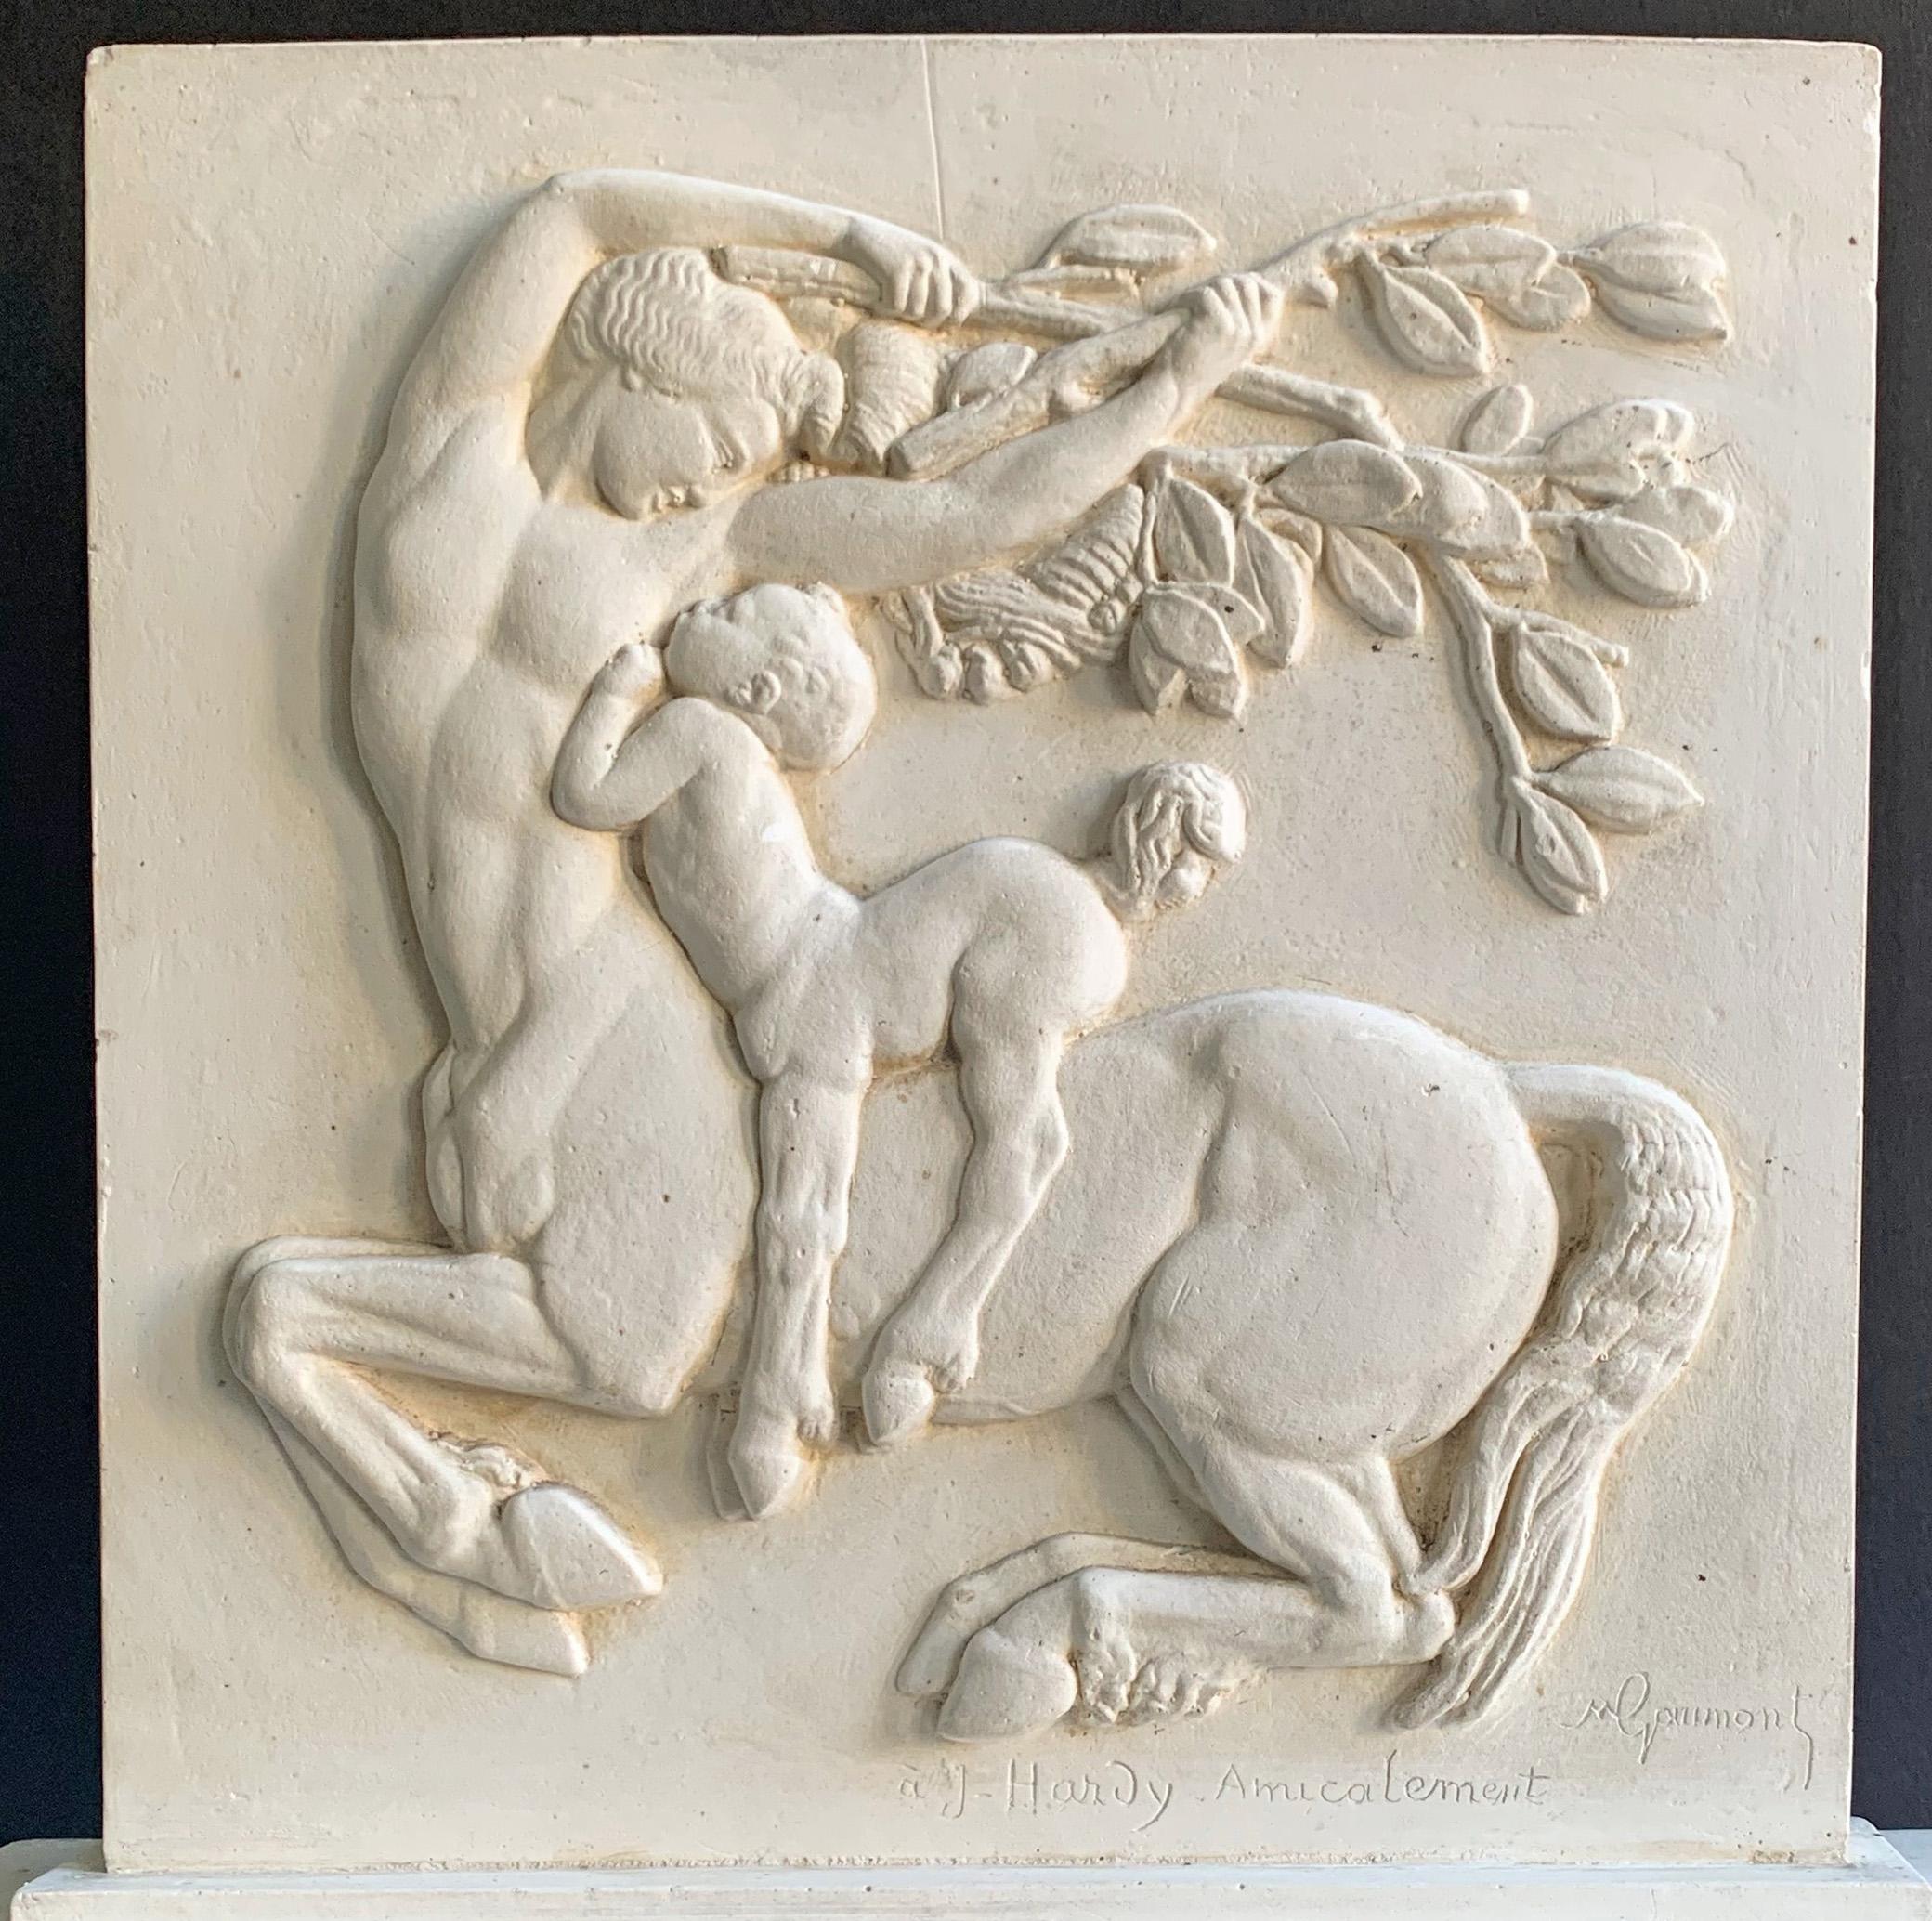 A classic and important example of stylized Art Deco figural sculpture, this bas relief of two centaurs -- a father centaur being embraced by a baby centaur -- is the original plaster maquette by Marcel Armand Gaumont for a sculpture adorning the